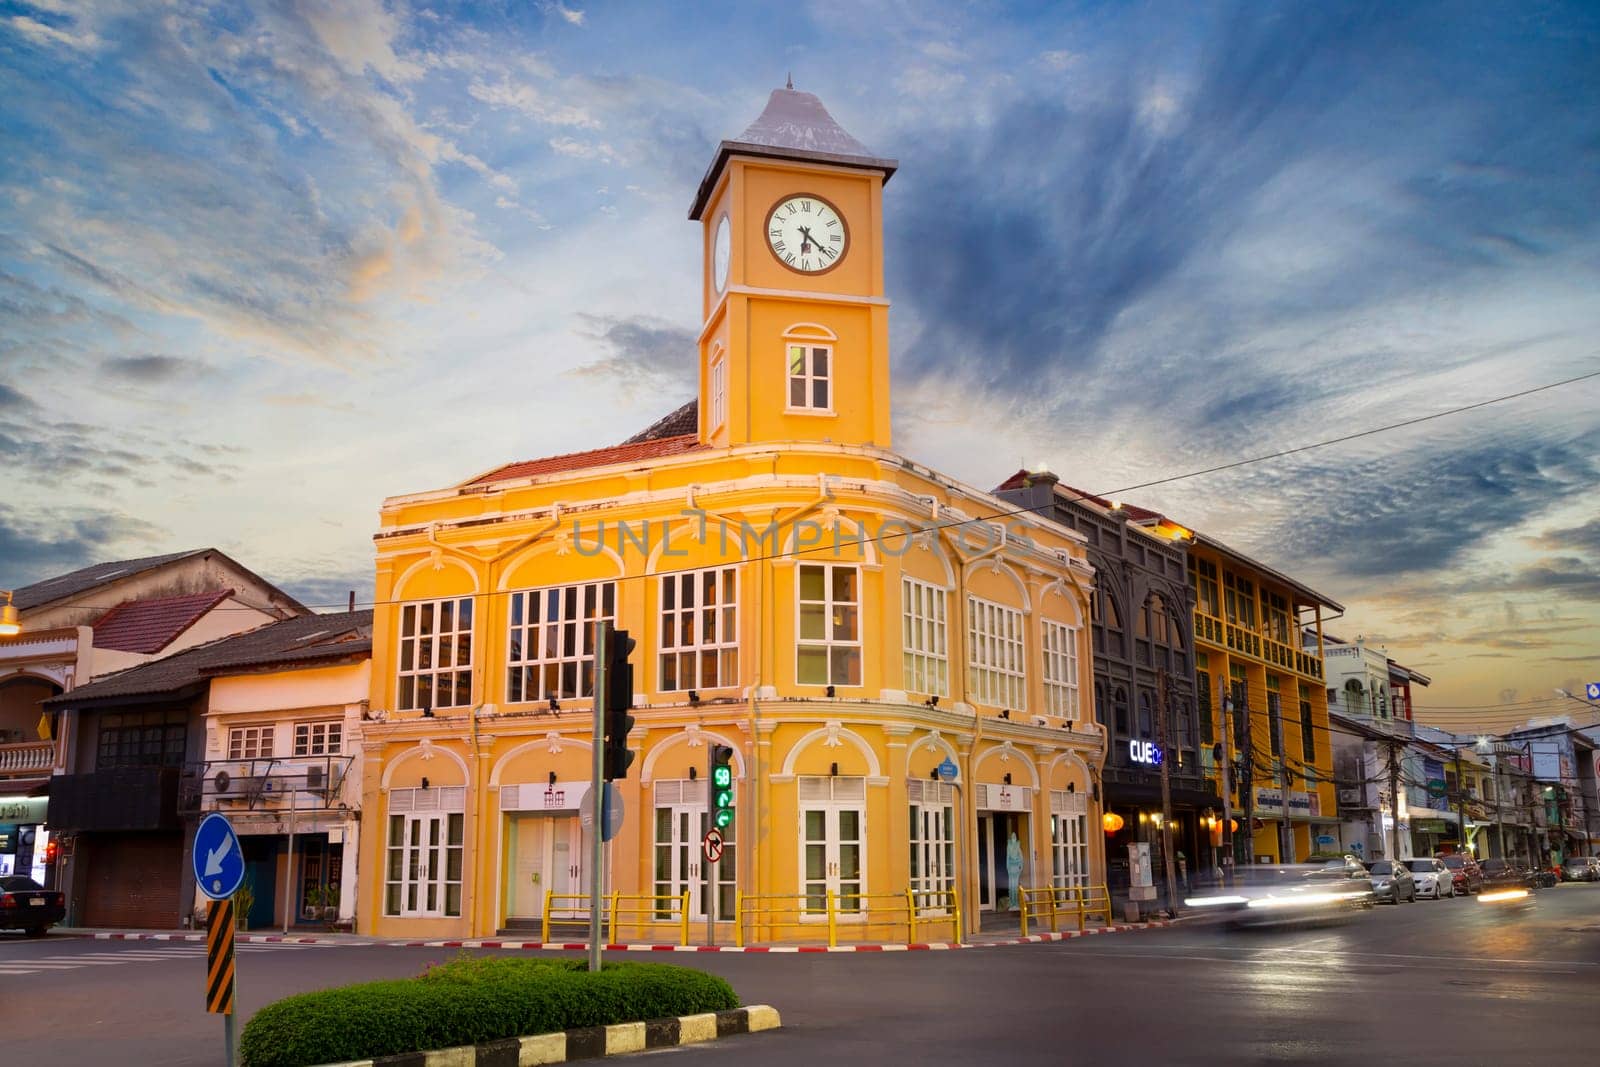 The Phuket Thailand , September 14th 2020 ; Landmark chino-portuguese clock tower in phuket old town, Thailand, with light trails on road in twilight time. by Gamjai